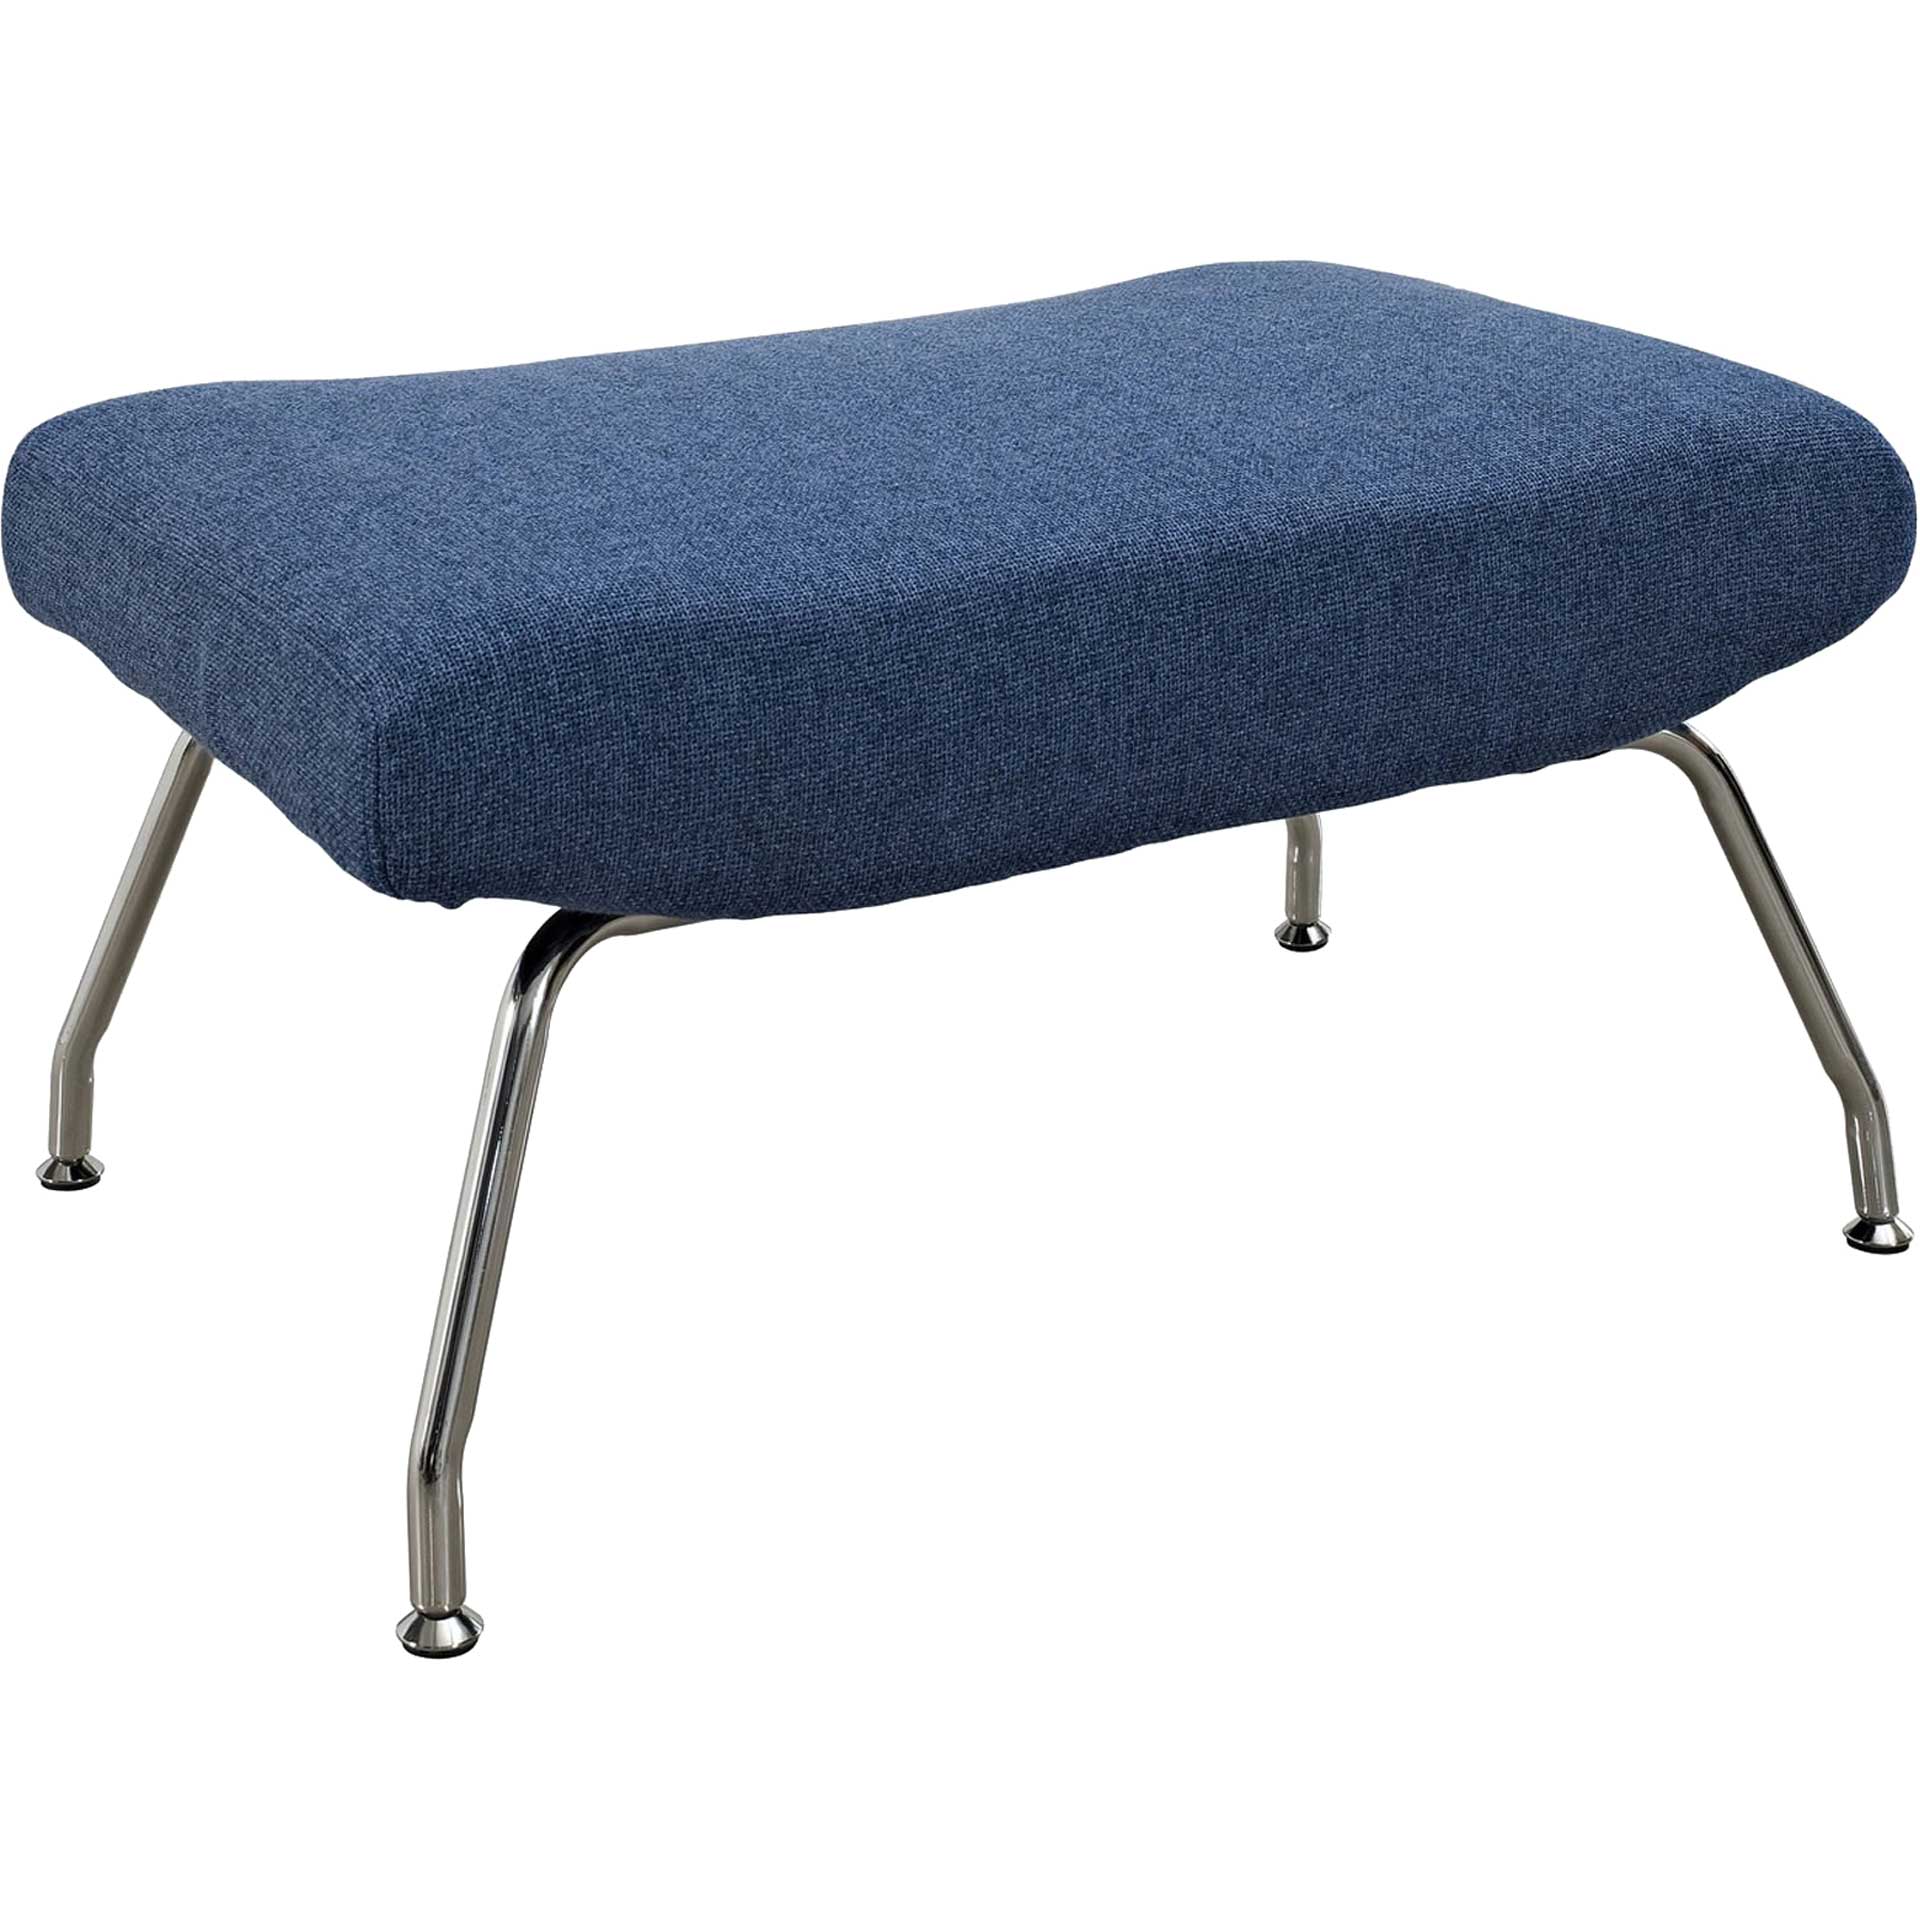 Clarell Lounge Chair Blue Tweed